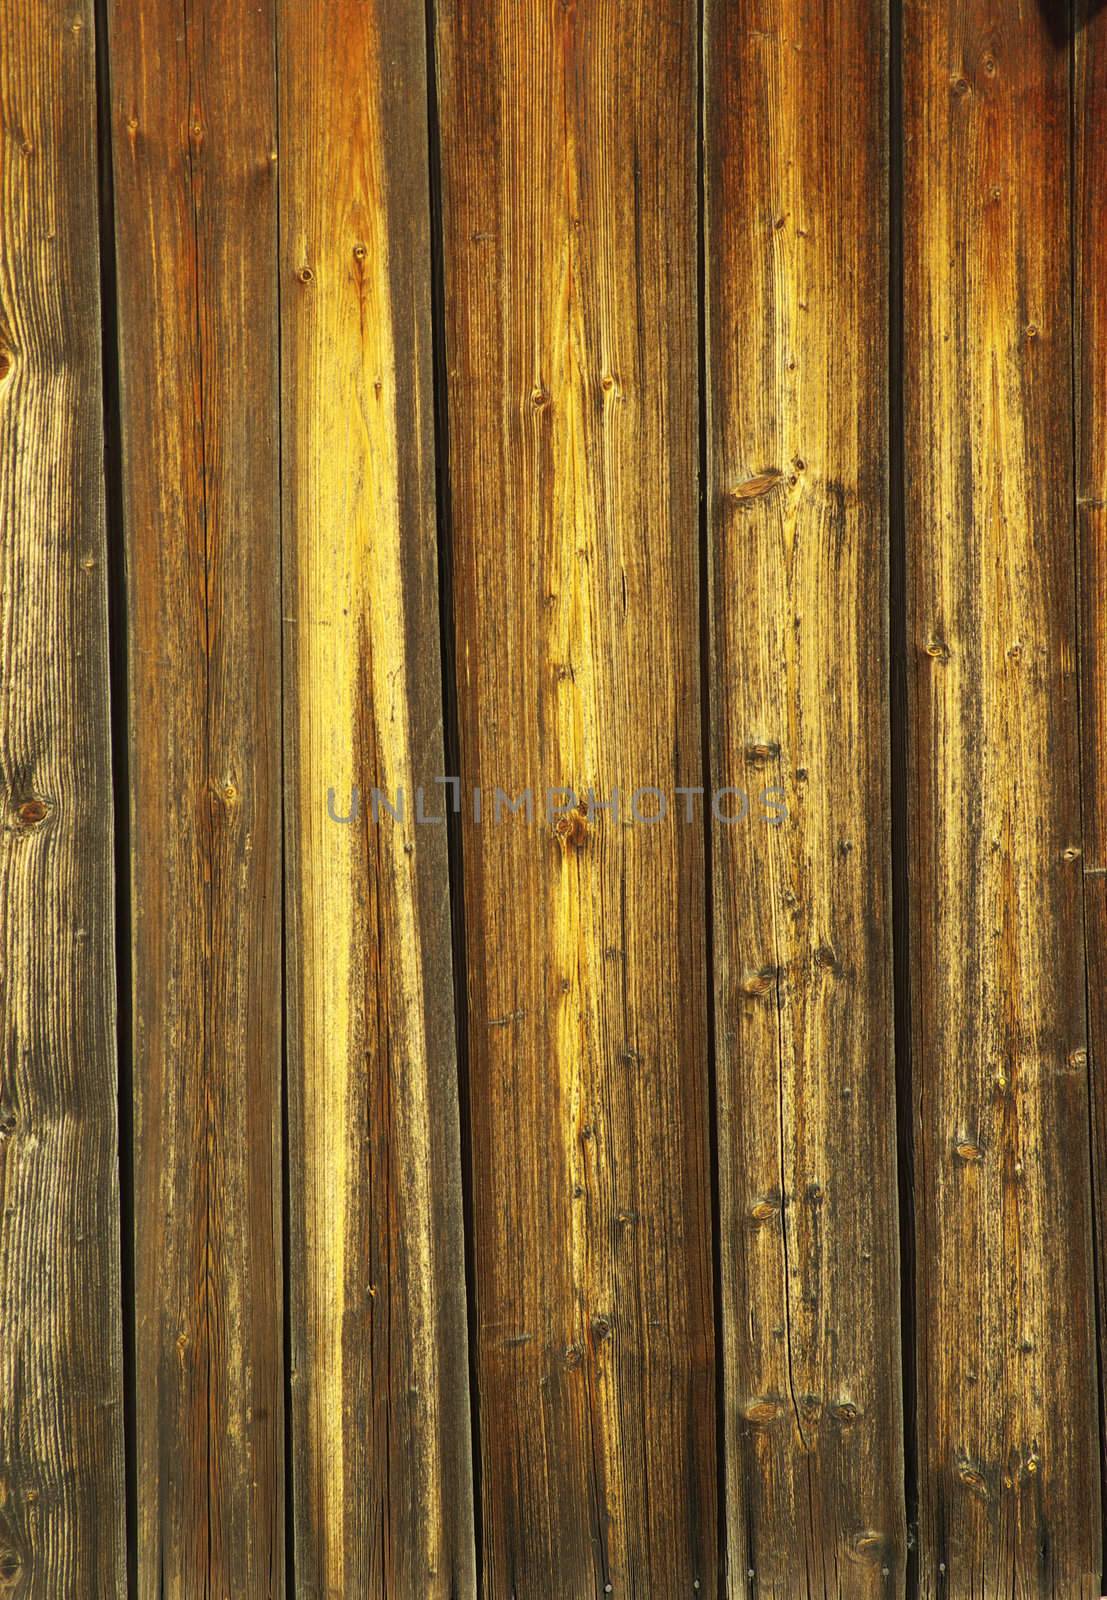  brown wood texture with a natural patterns